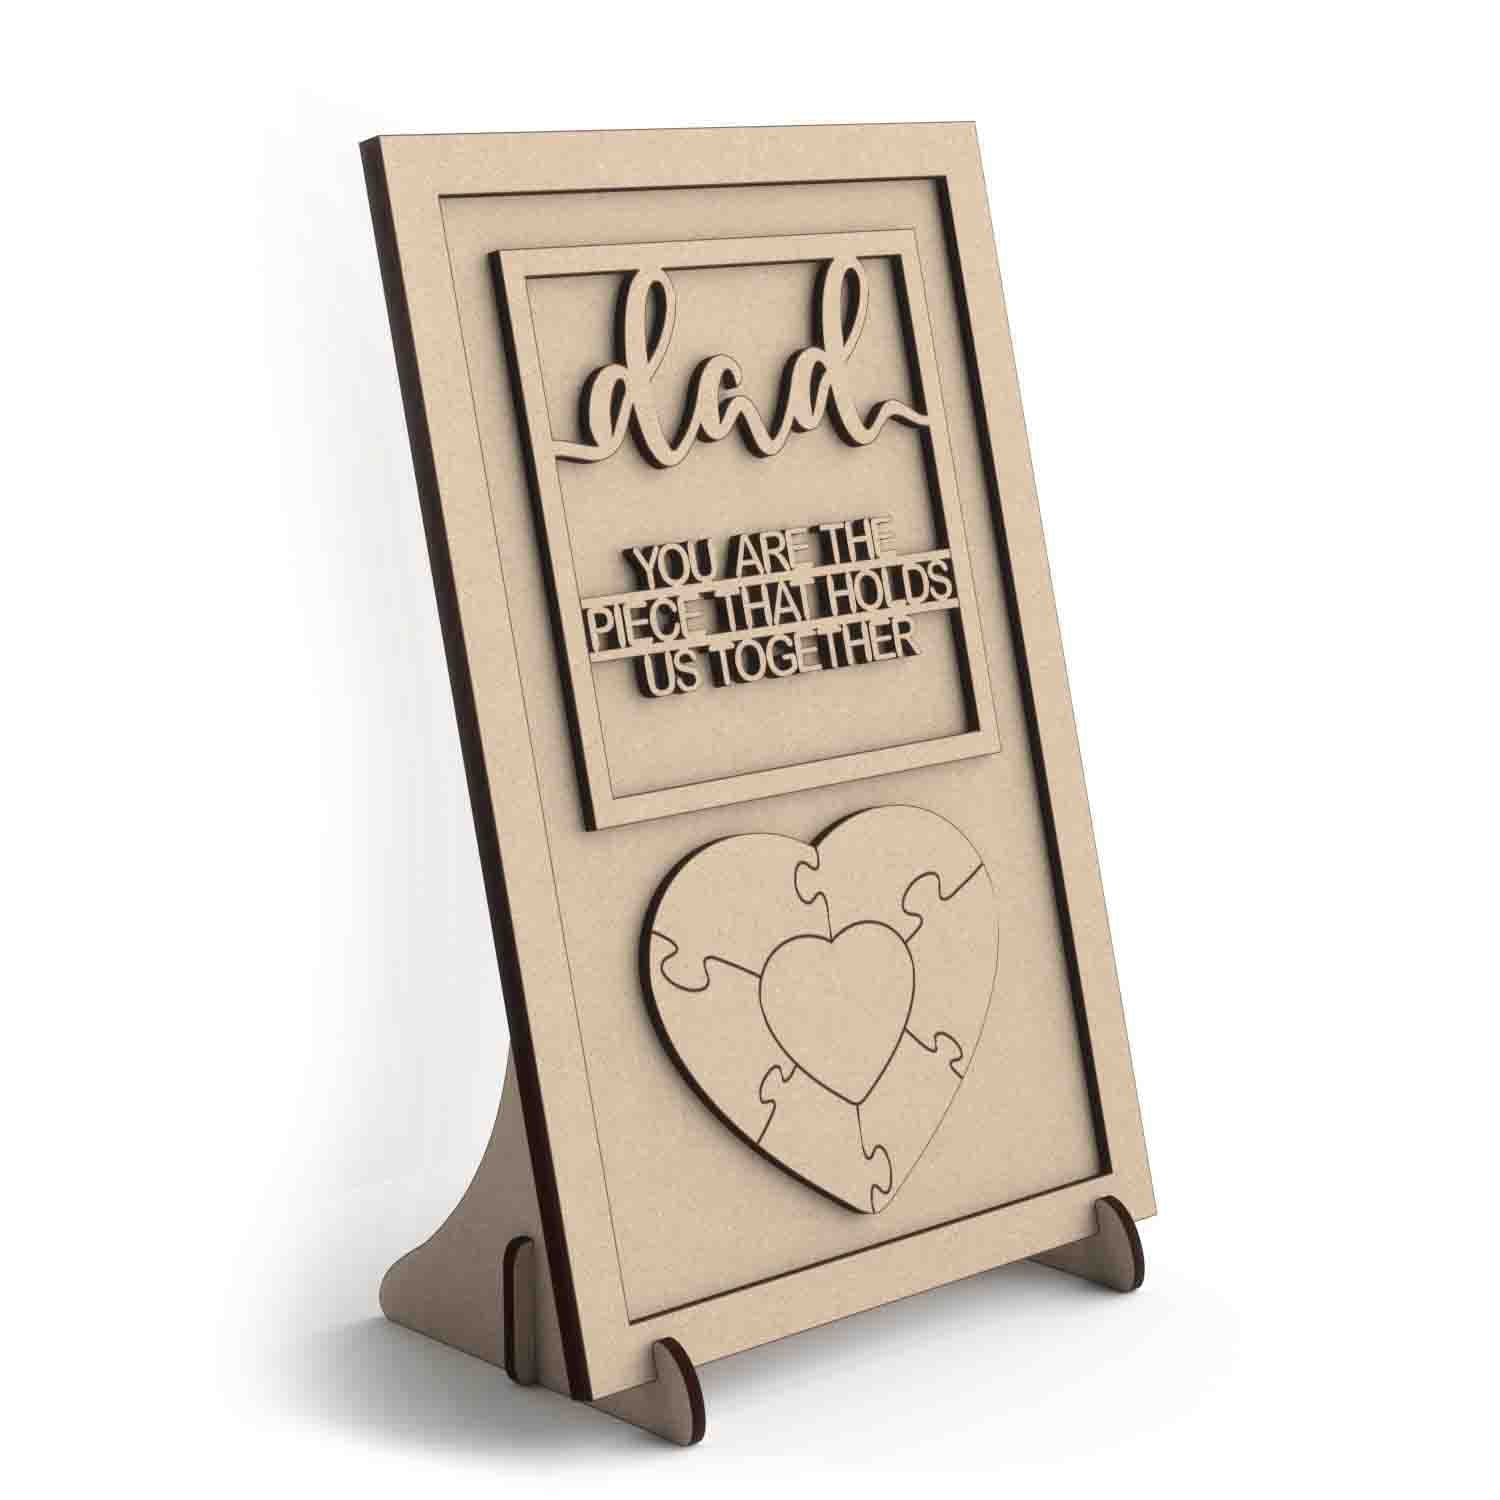 Father's Day wooden craft shape Decoration Plaque Kit.